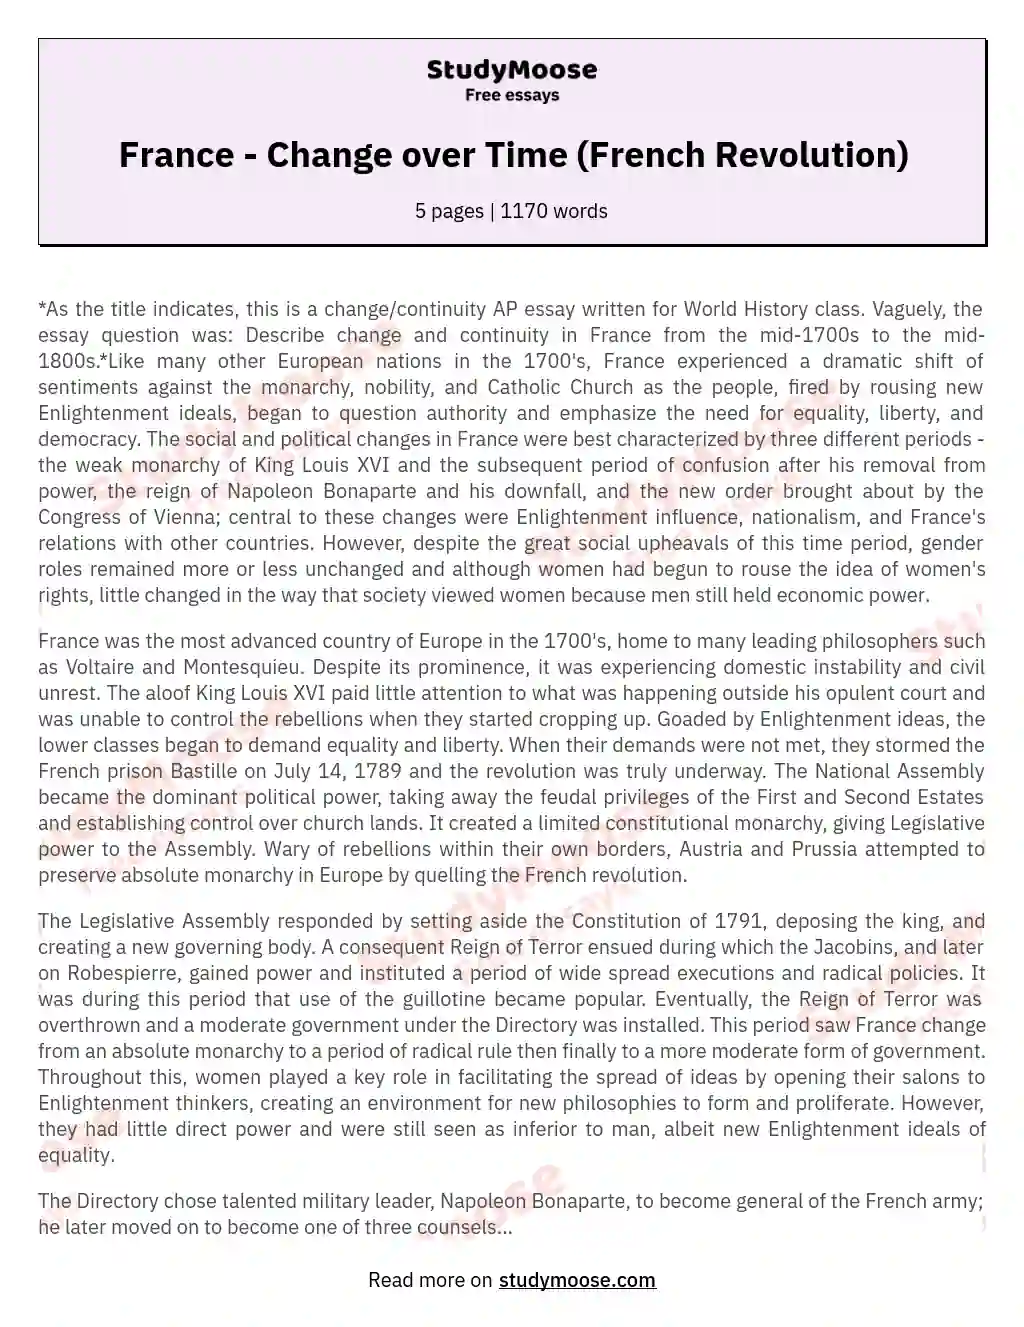 Transformation and Continuity in France: 18th Century Shifts essay